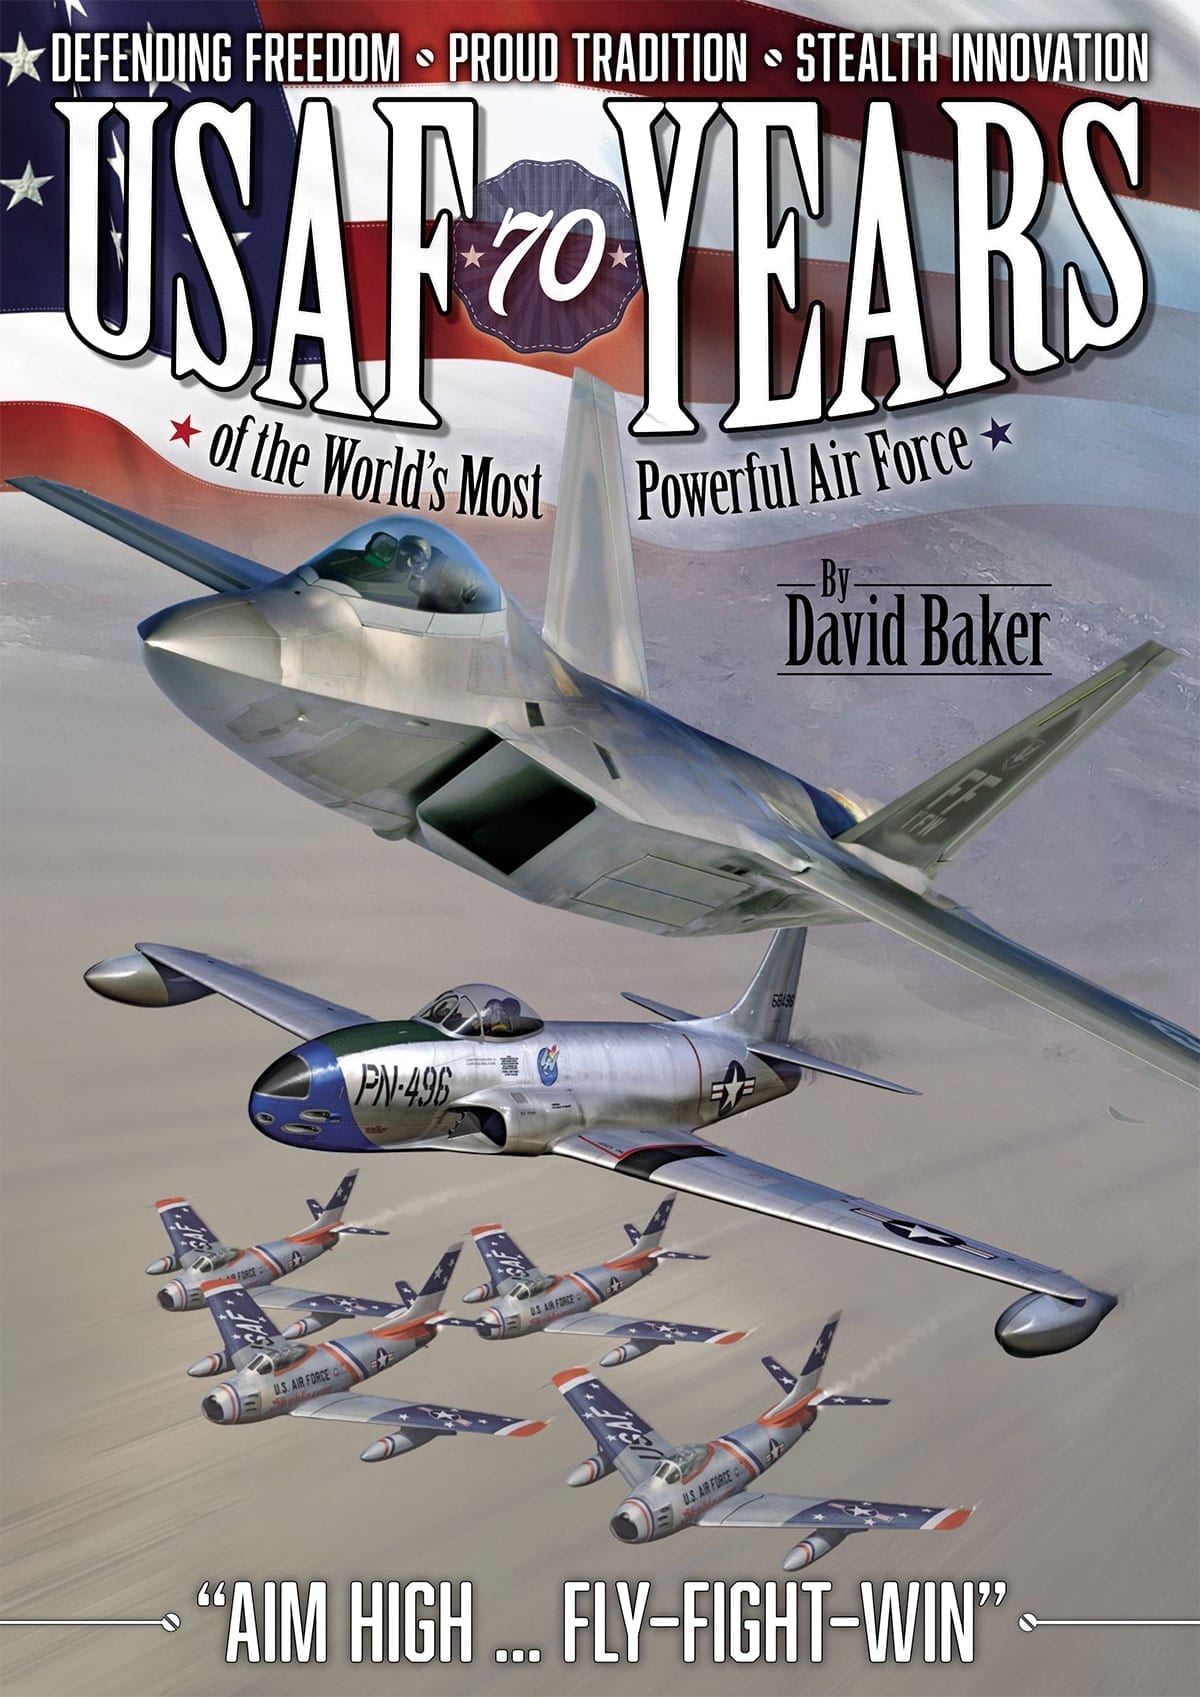 USAF 70 Years of the World’s Most Powerful Air Force